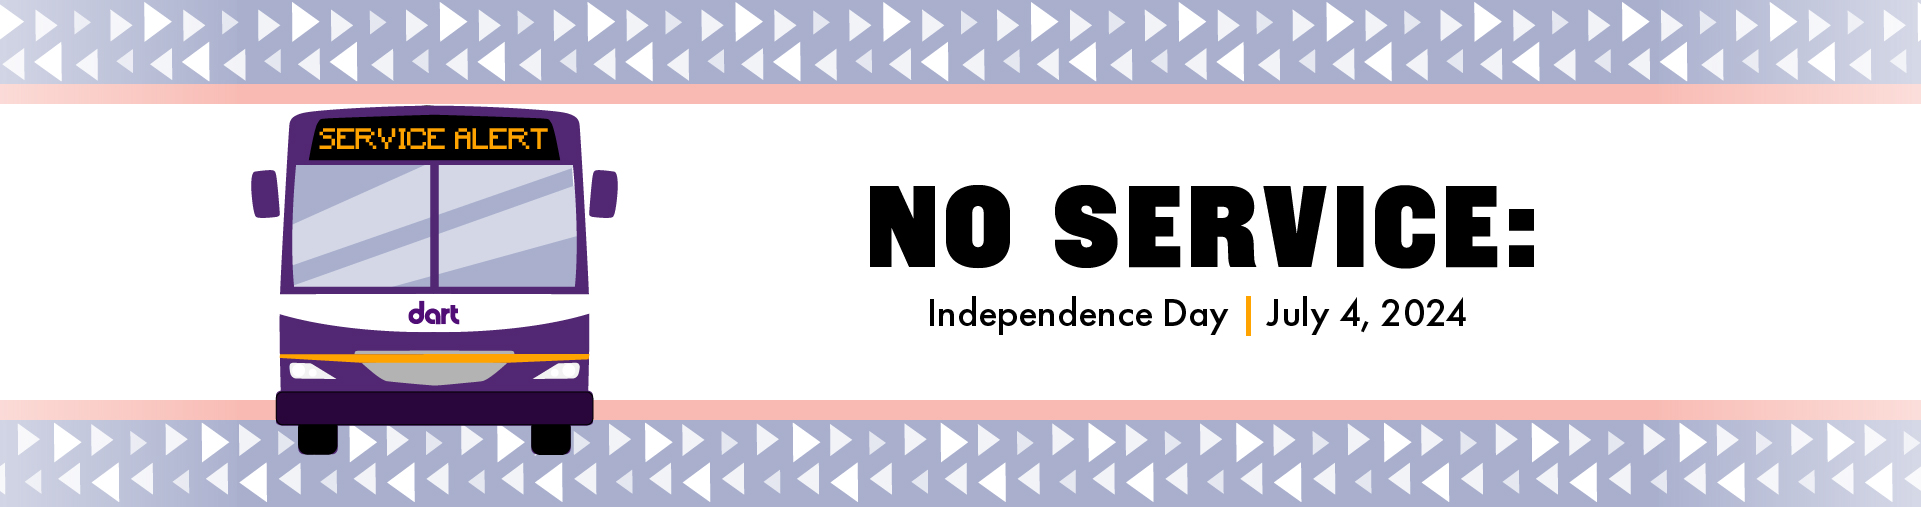 No Service on Independence Day 2024 